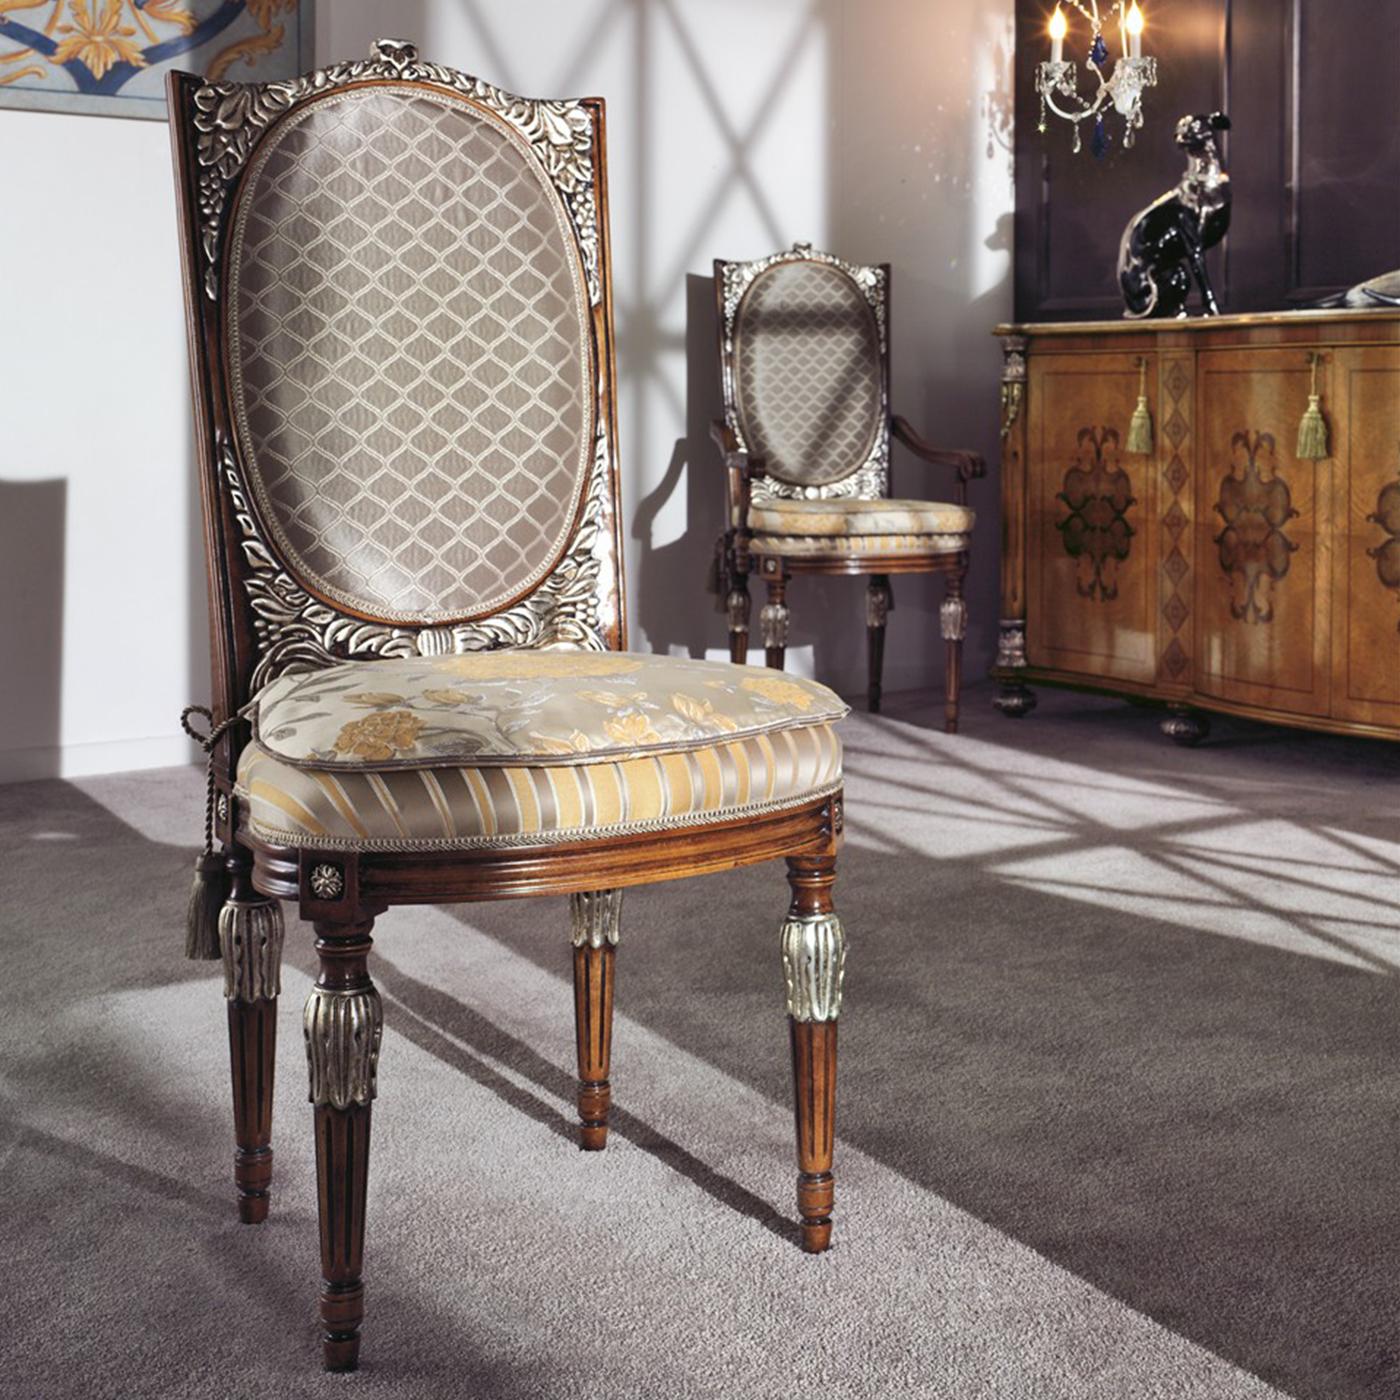 Reflecting Bianchini's craftsmanship in combining different textures to create exquisite pieces, this Baroque-style chair has an ornate silhouette where the solid beech structure is embellished with extensive carved decorations coated with luminous